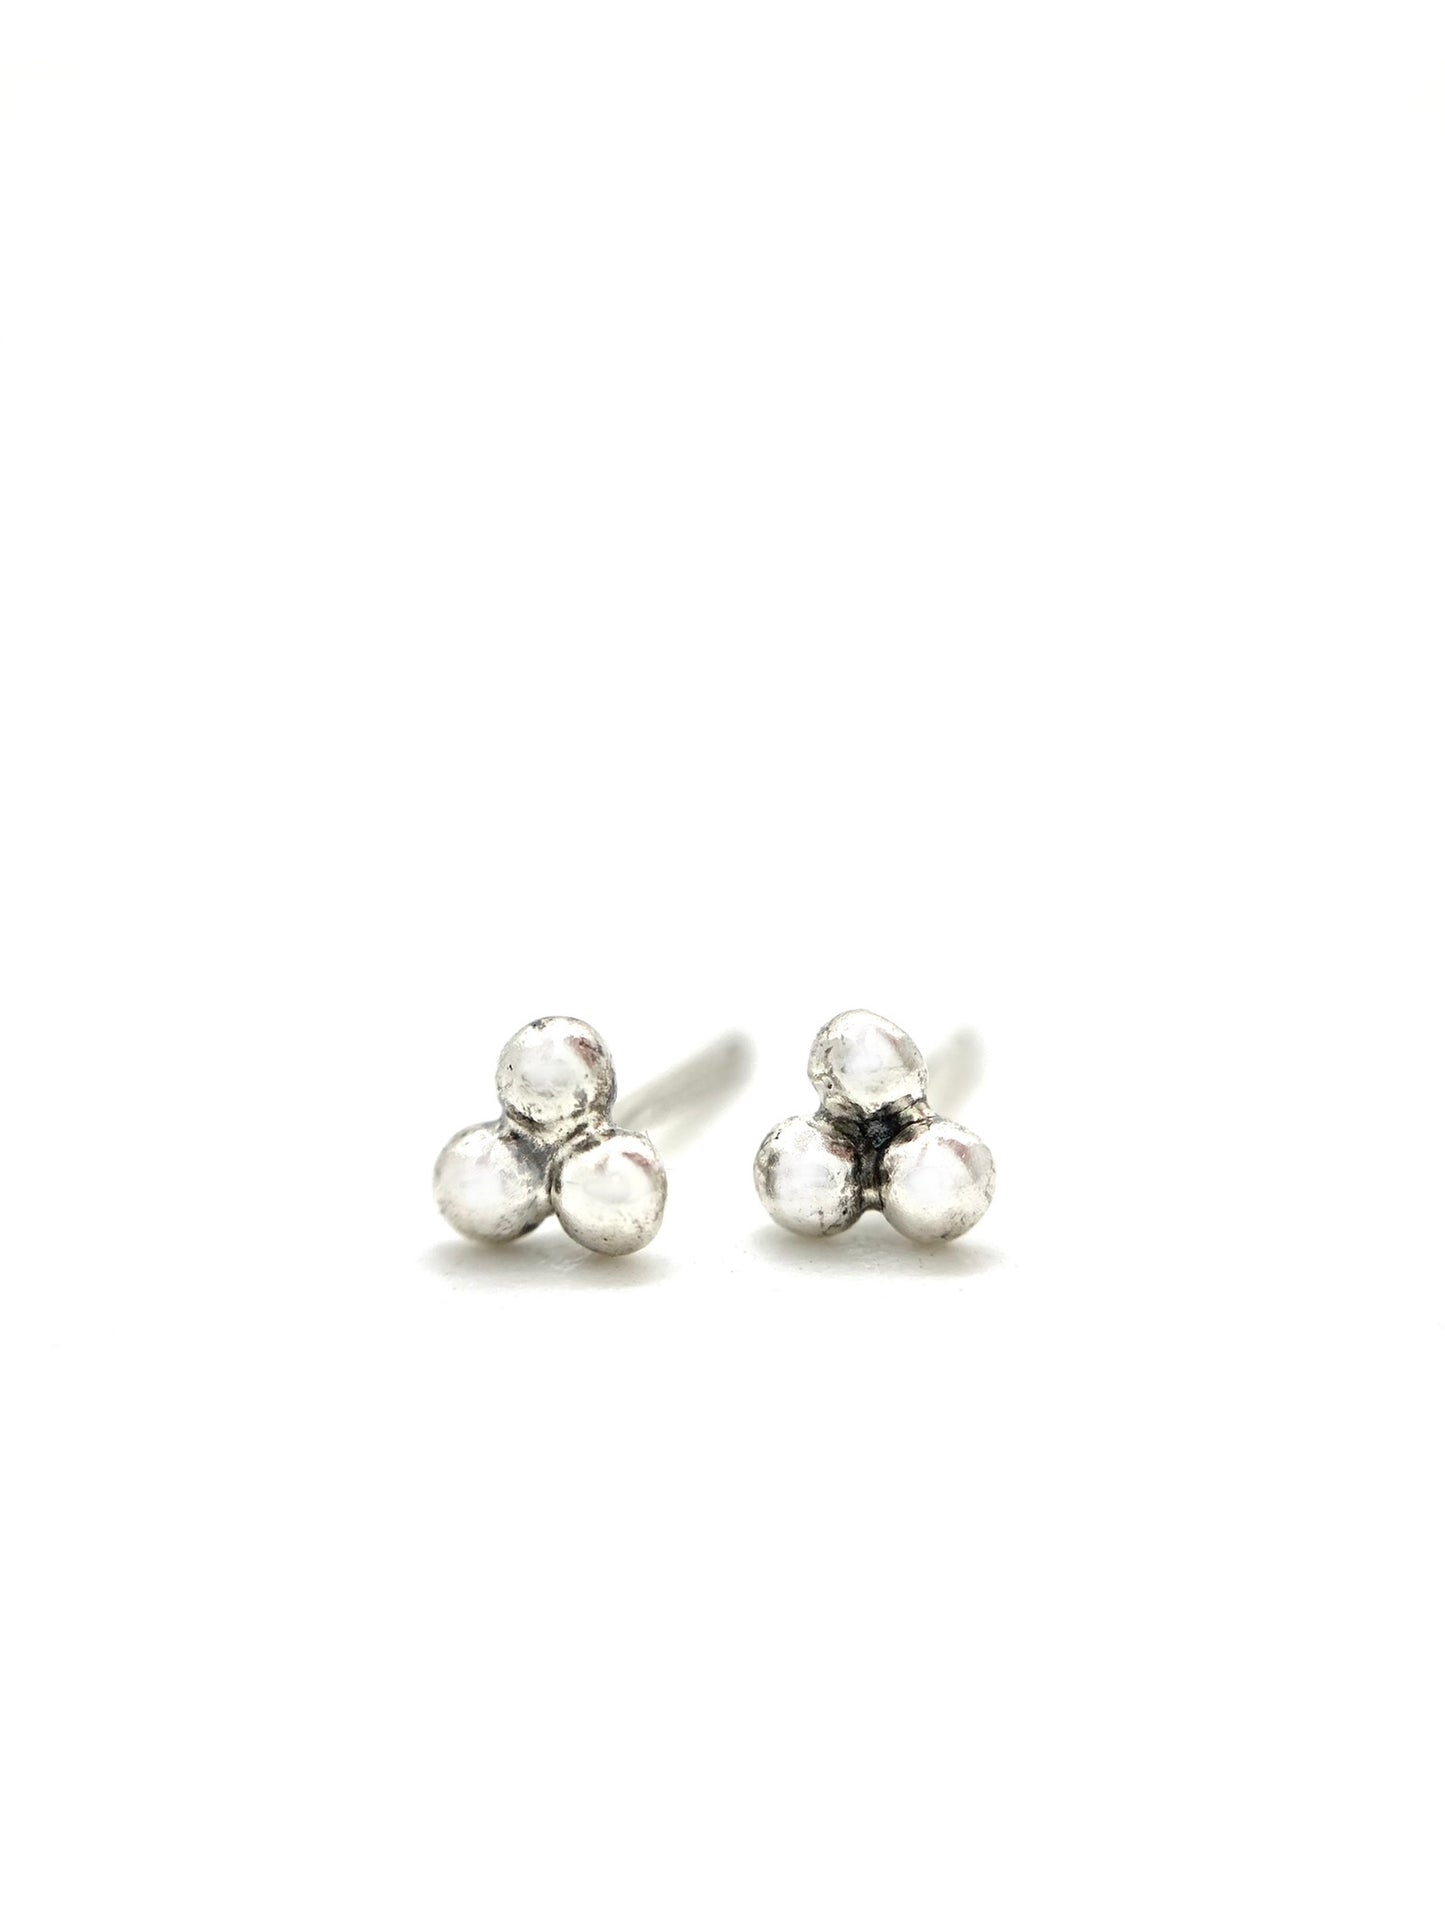 Tri-Ball Studs in Sterling Silver